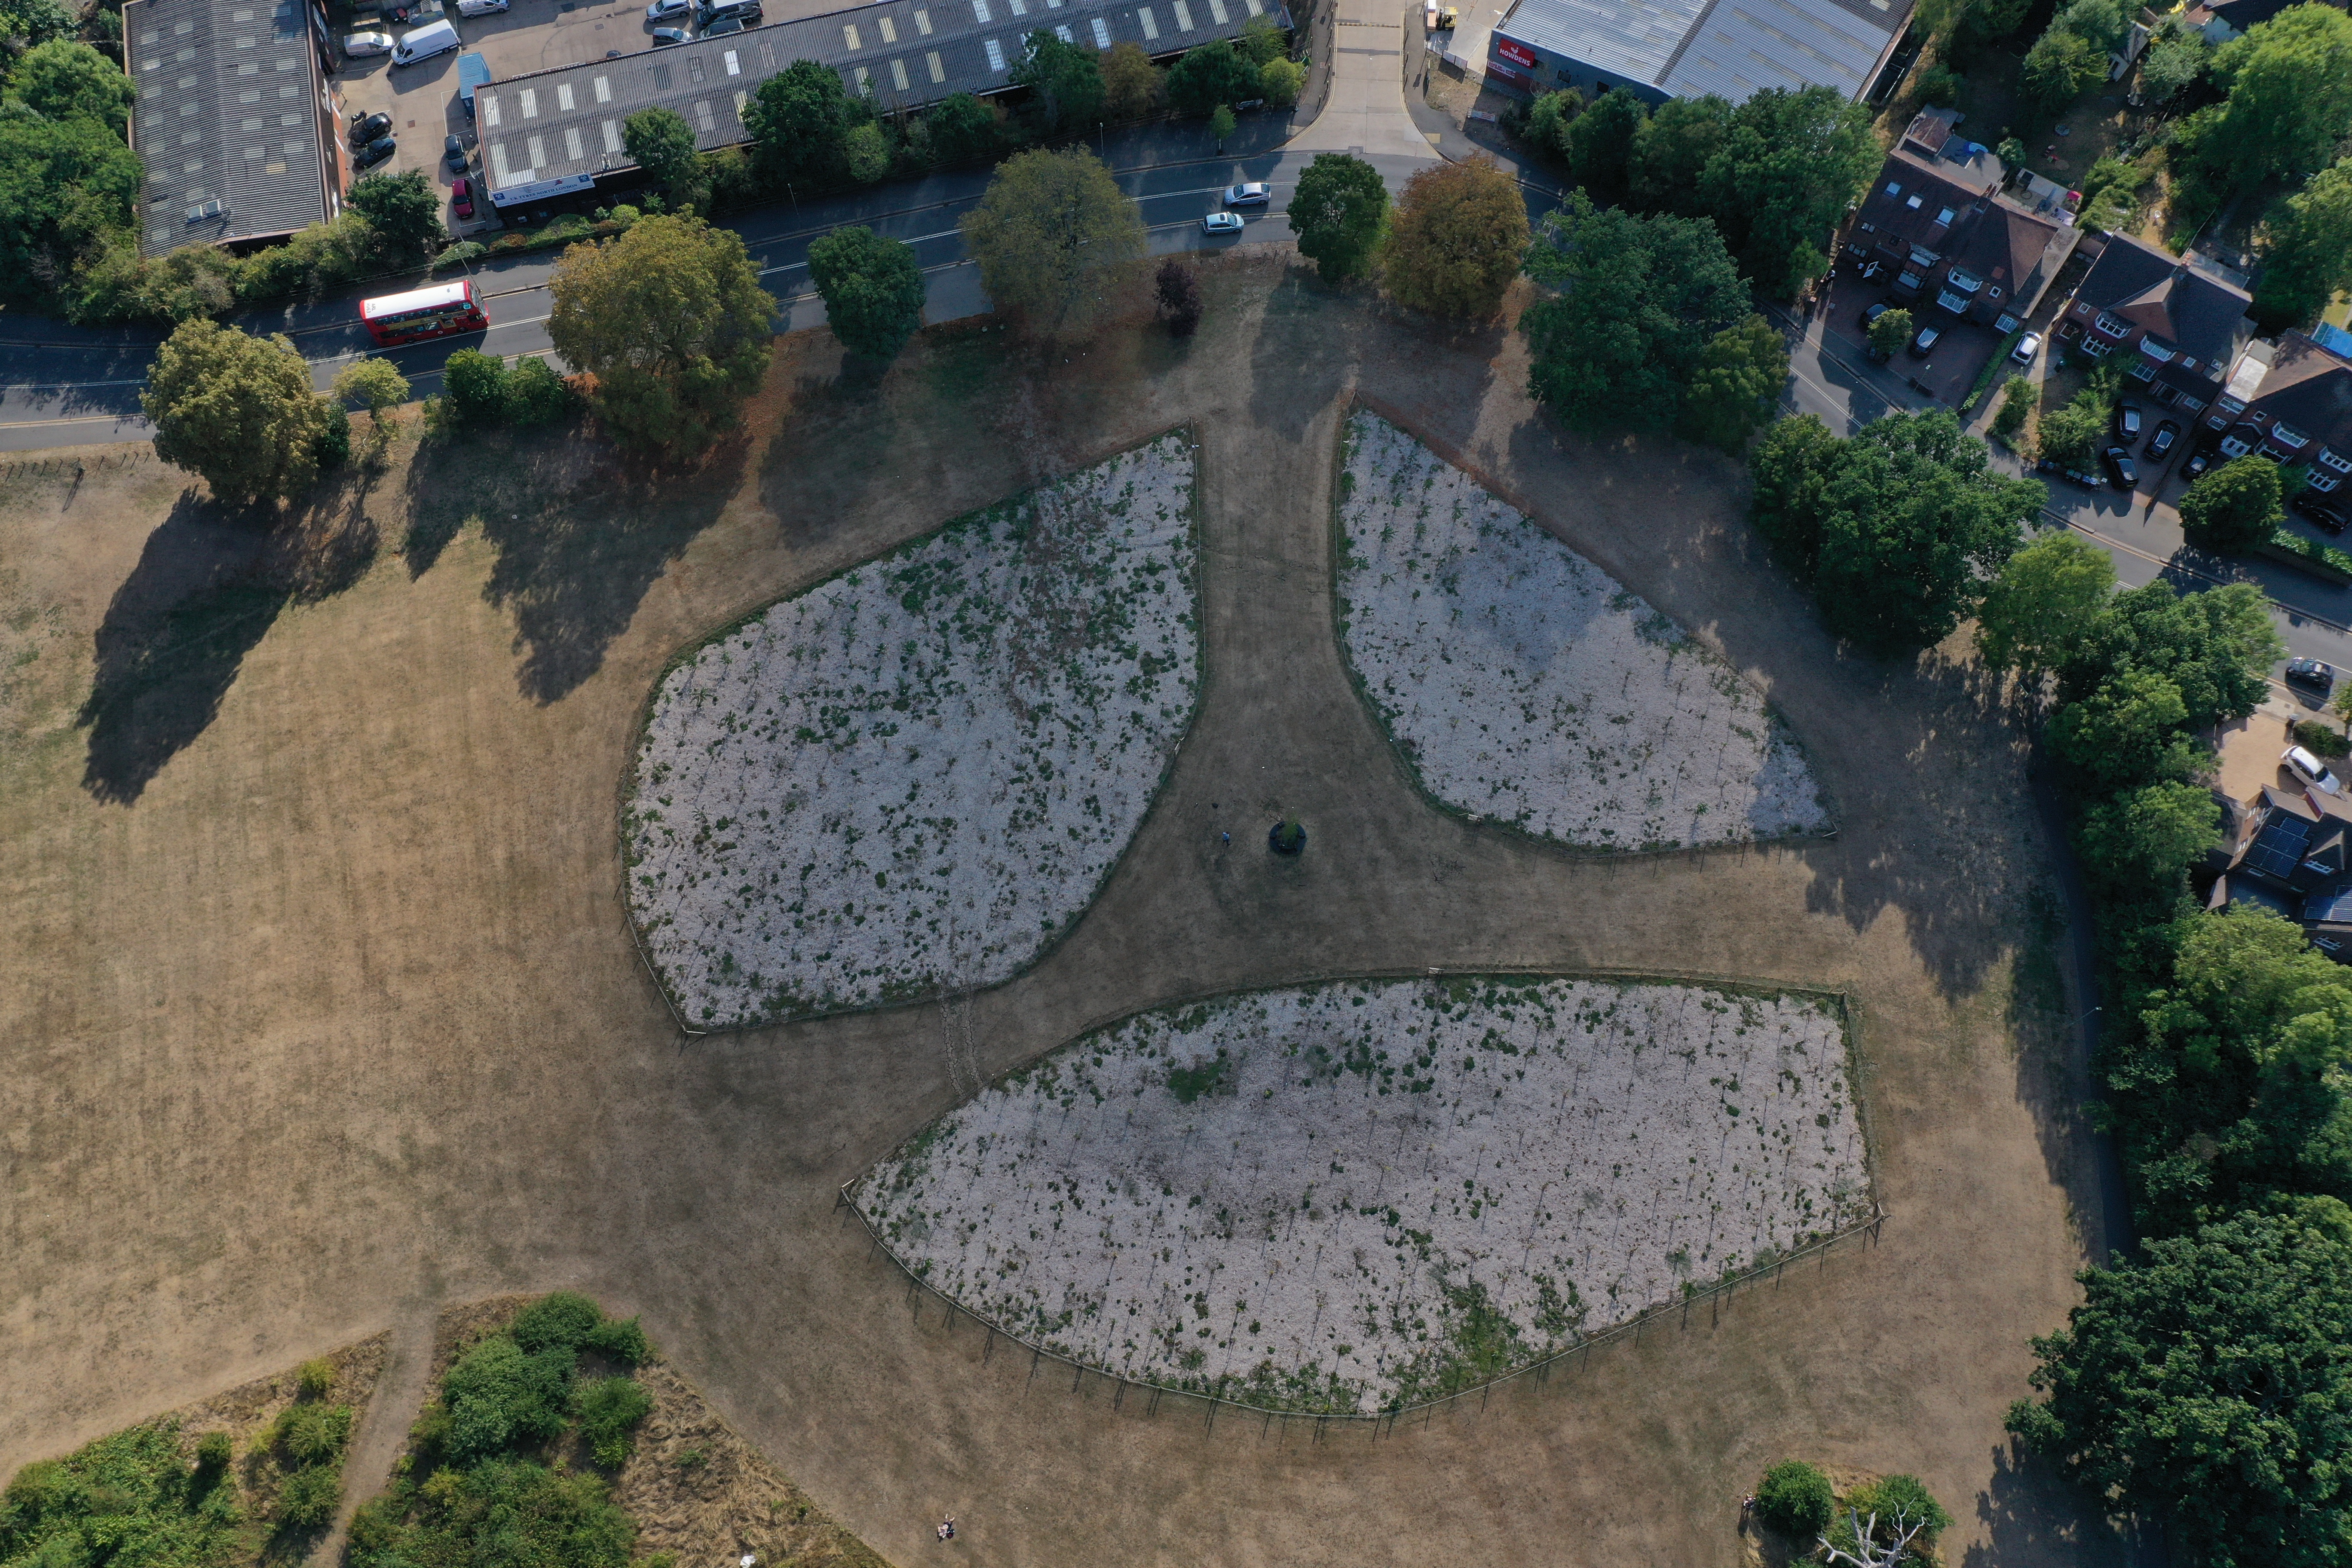 The Barnet Memorial Woodland from above